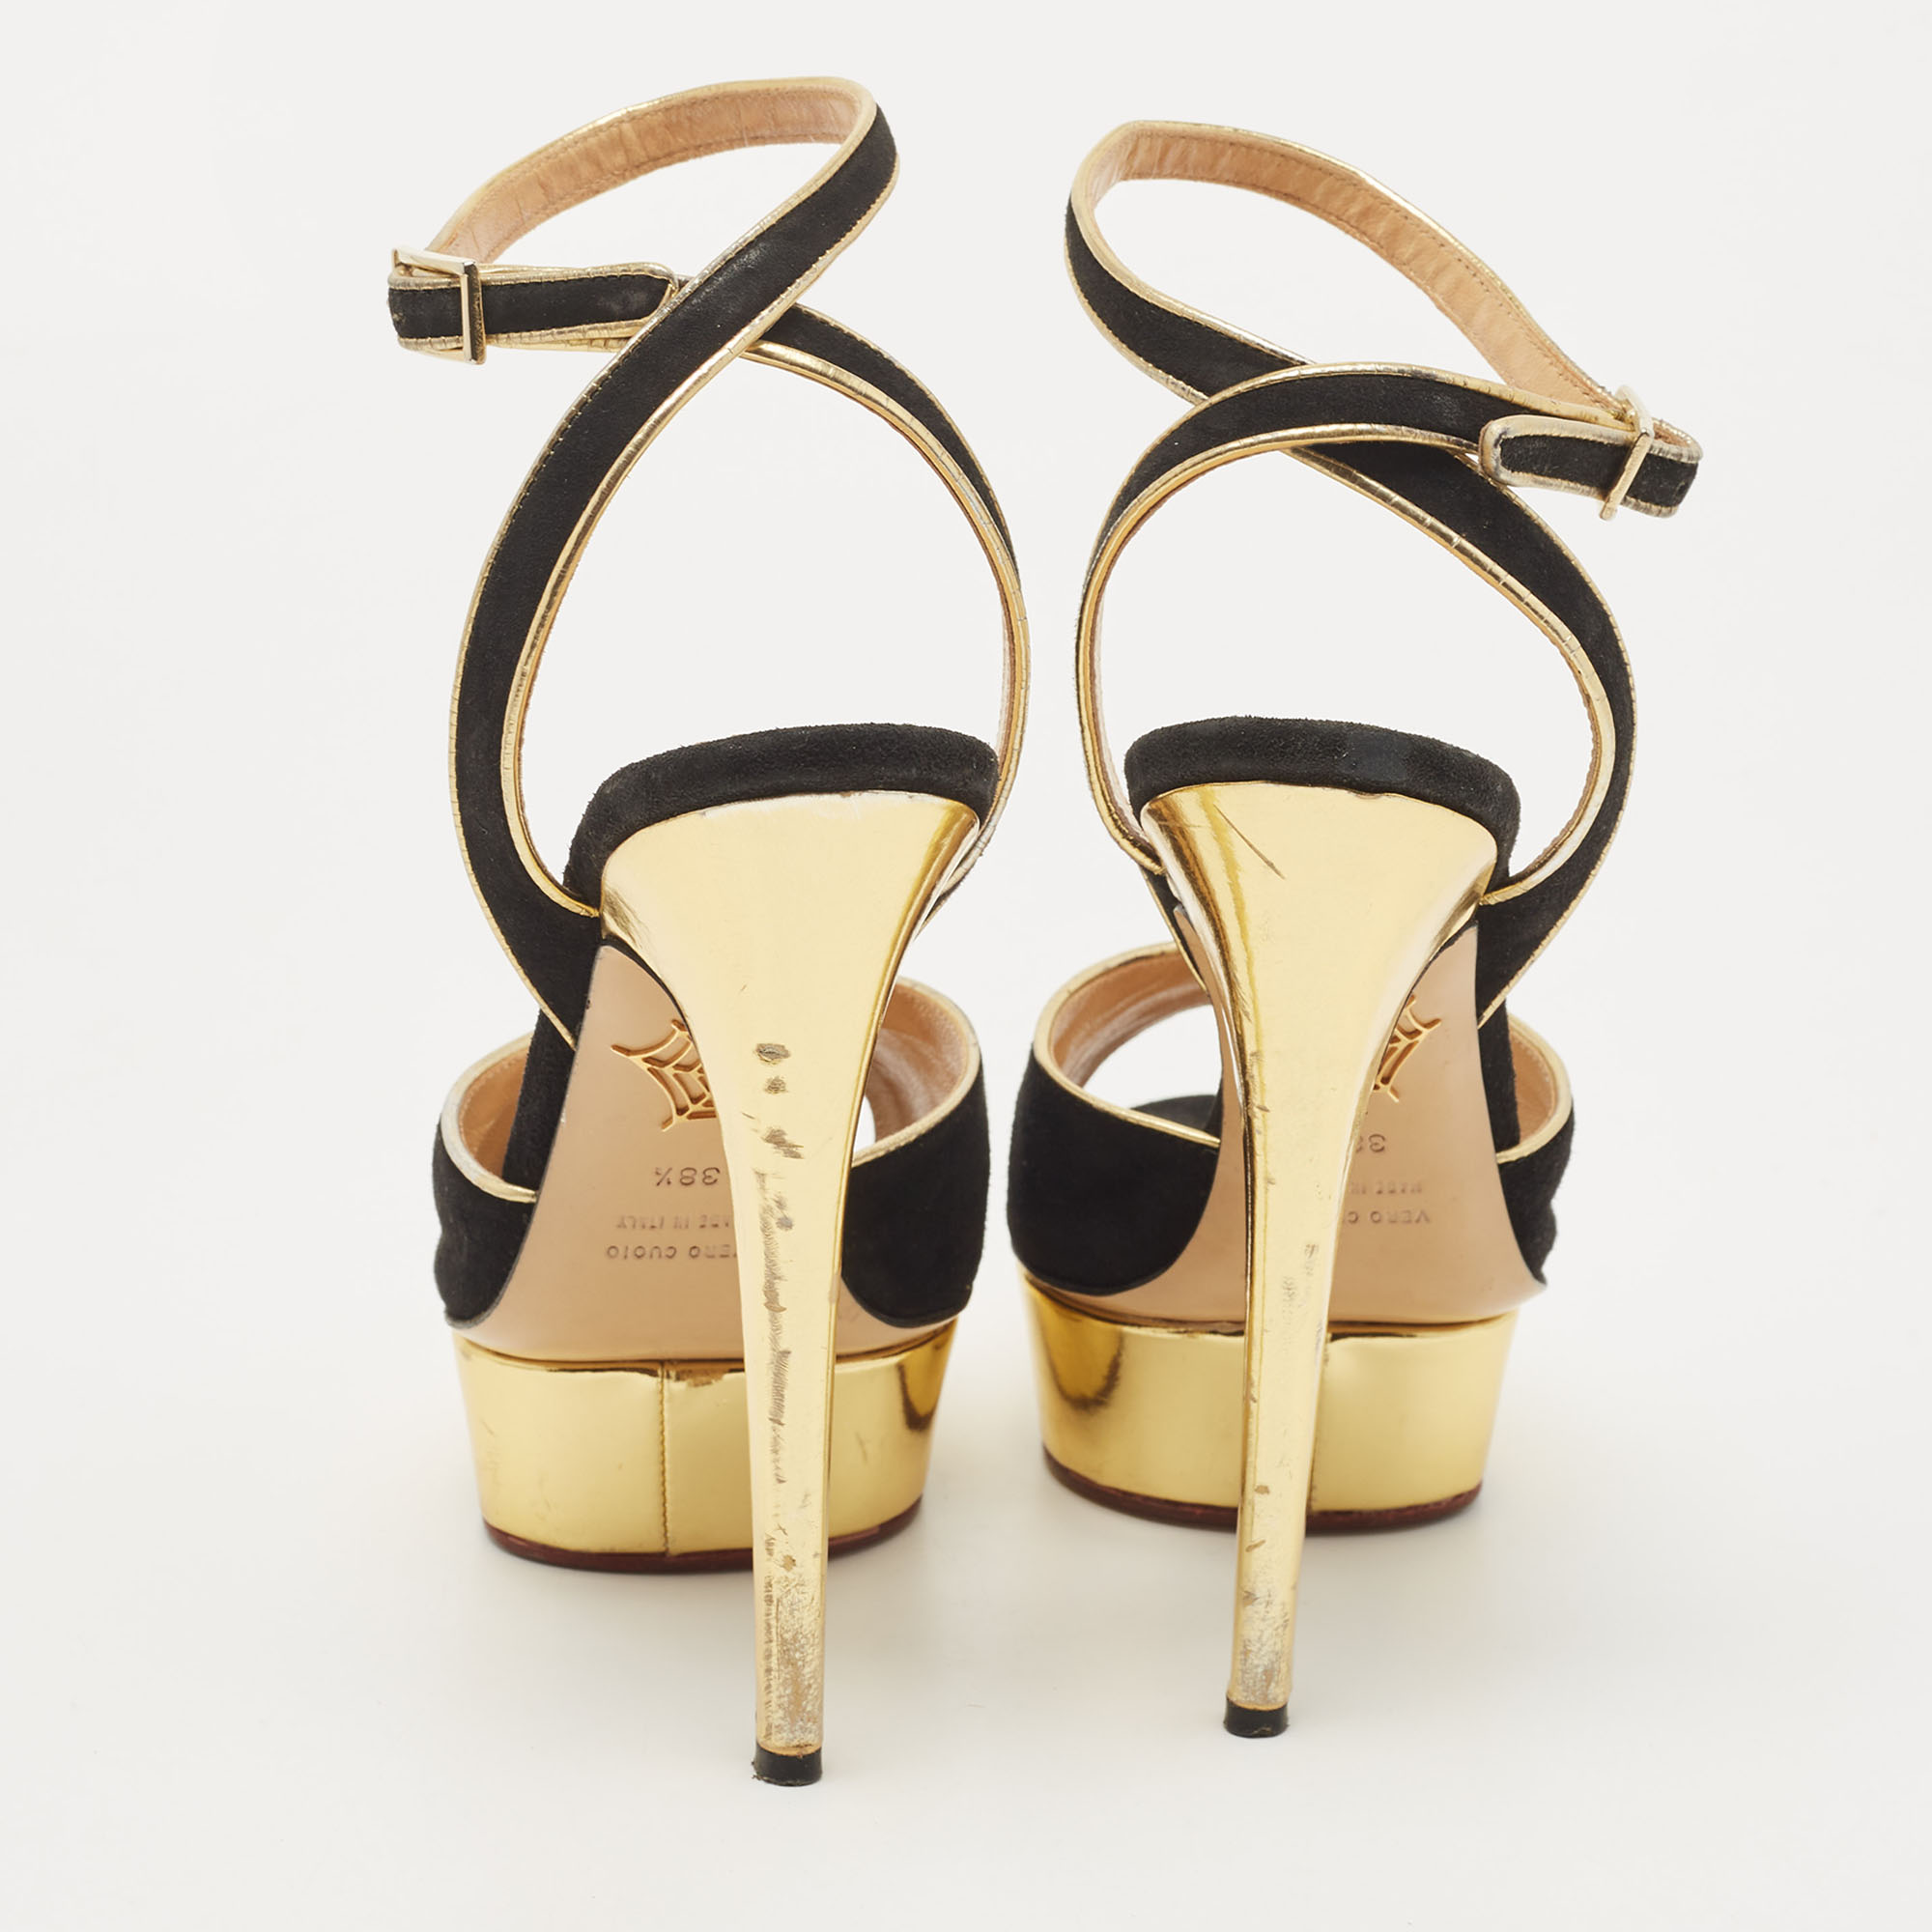 Charlotte Olympia Black Suede And Leather Peep Toe Platform Sandals Size 38.5